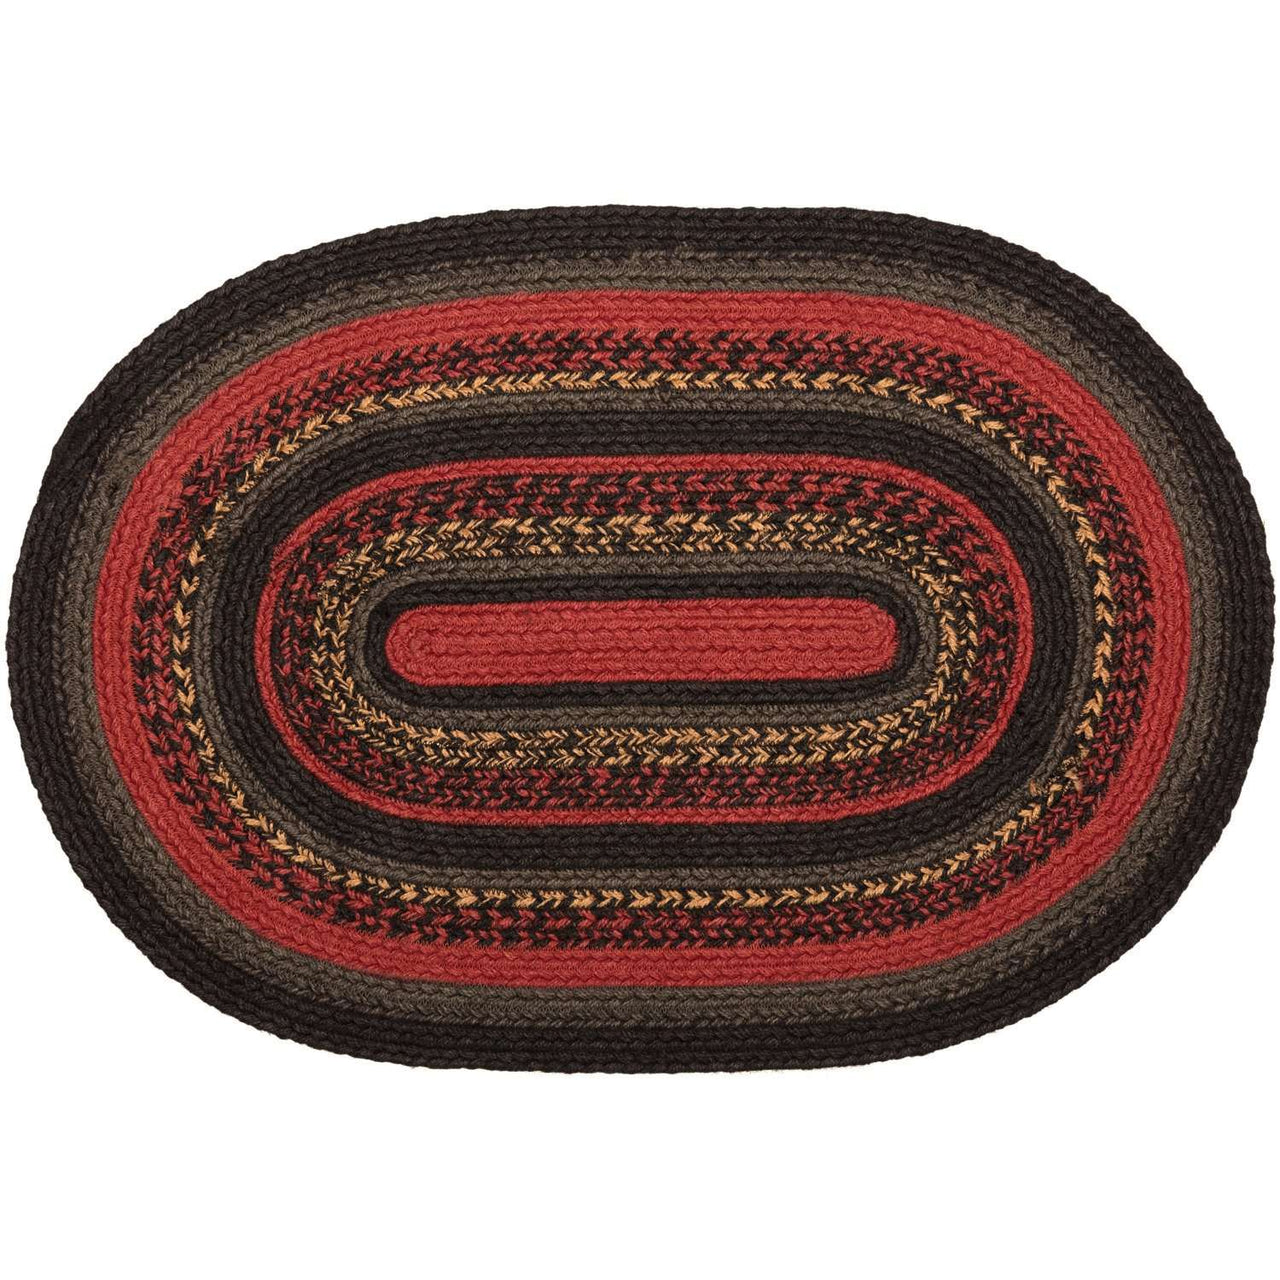 Cumberland Jute Braided Rugs Oval VHC Brands Rugs VHC Brands 